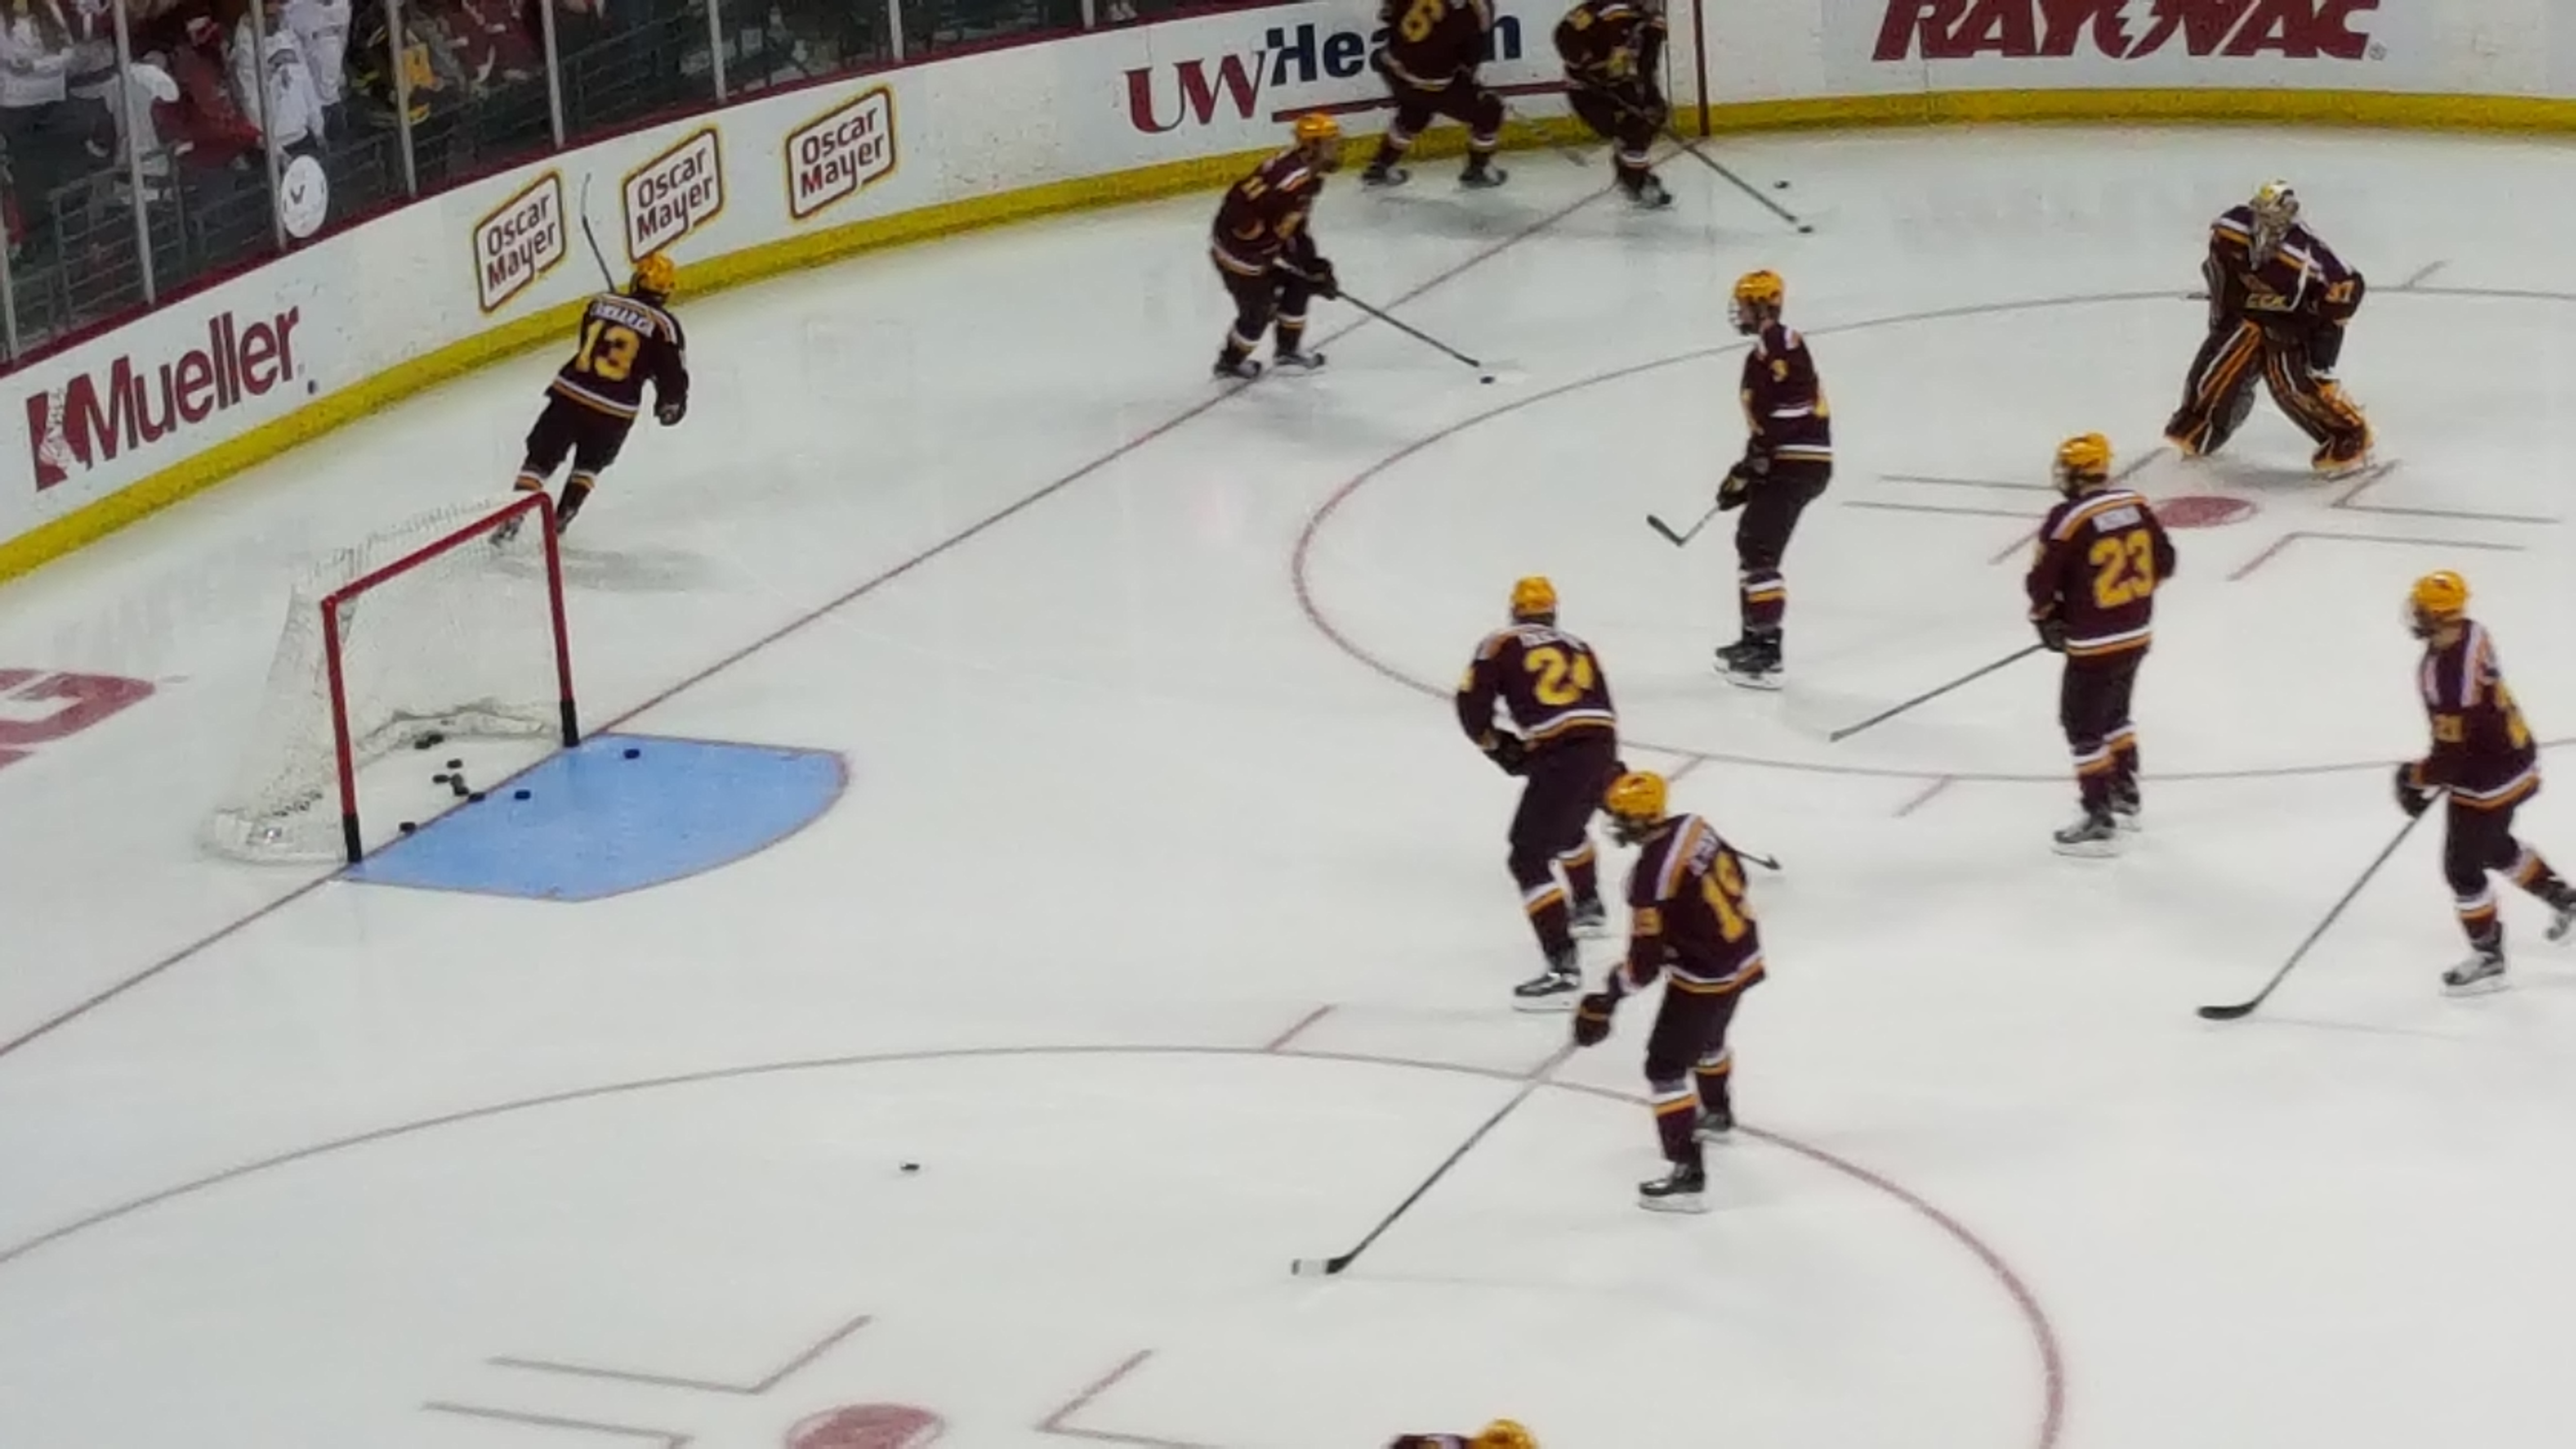 The Gophers warm up prior to their tilt with the Badgers in Madison on 1/23/16.